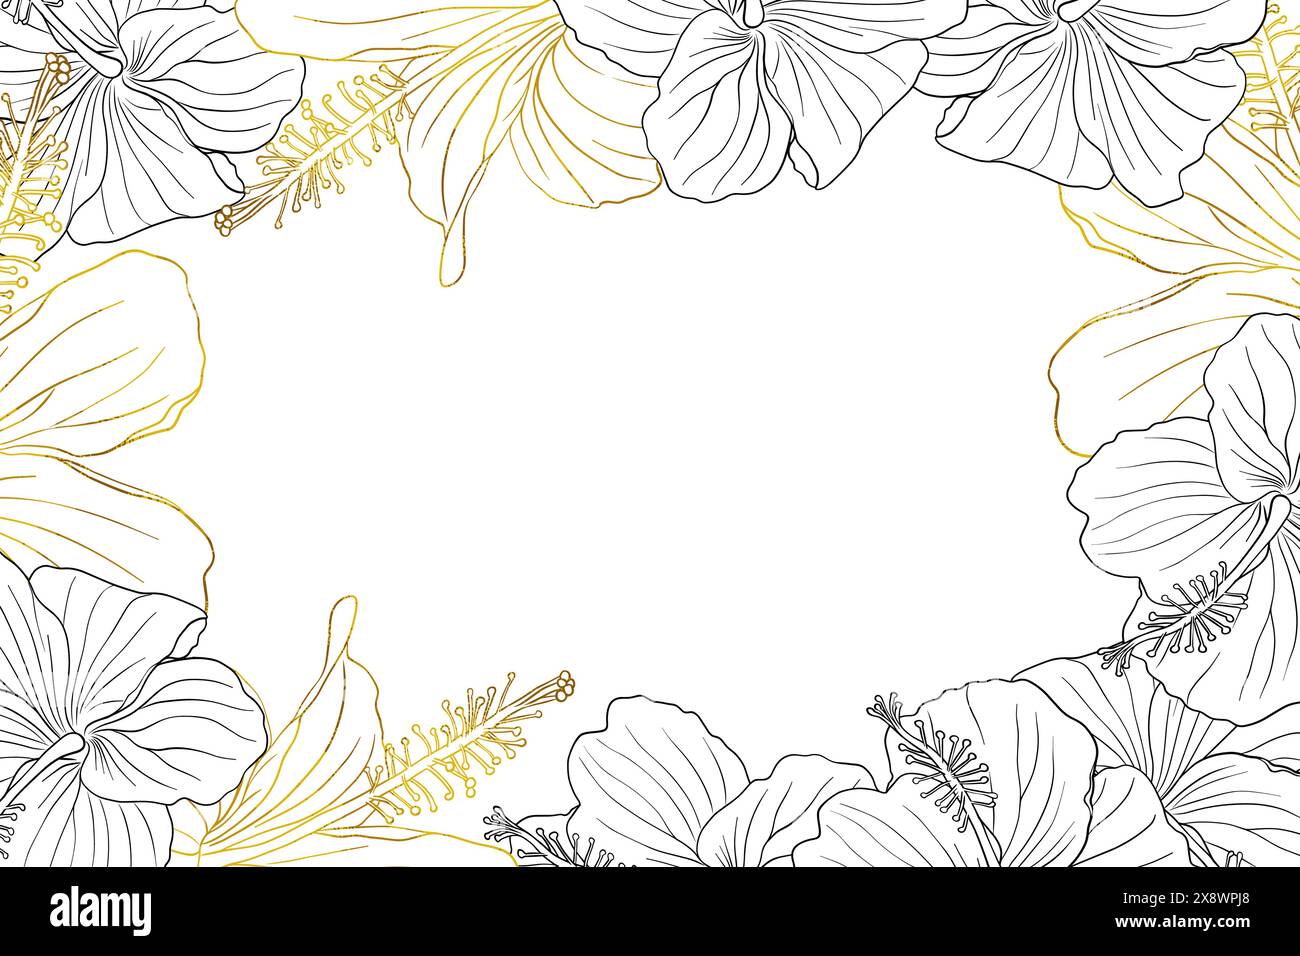 Hibiscus flower frame boarder for design of card, wedding invite, scrapbook. Line art black ink and golden hand drawn tropical floral background Stock Vector